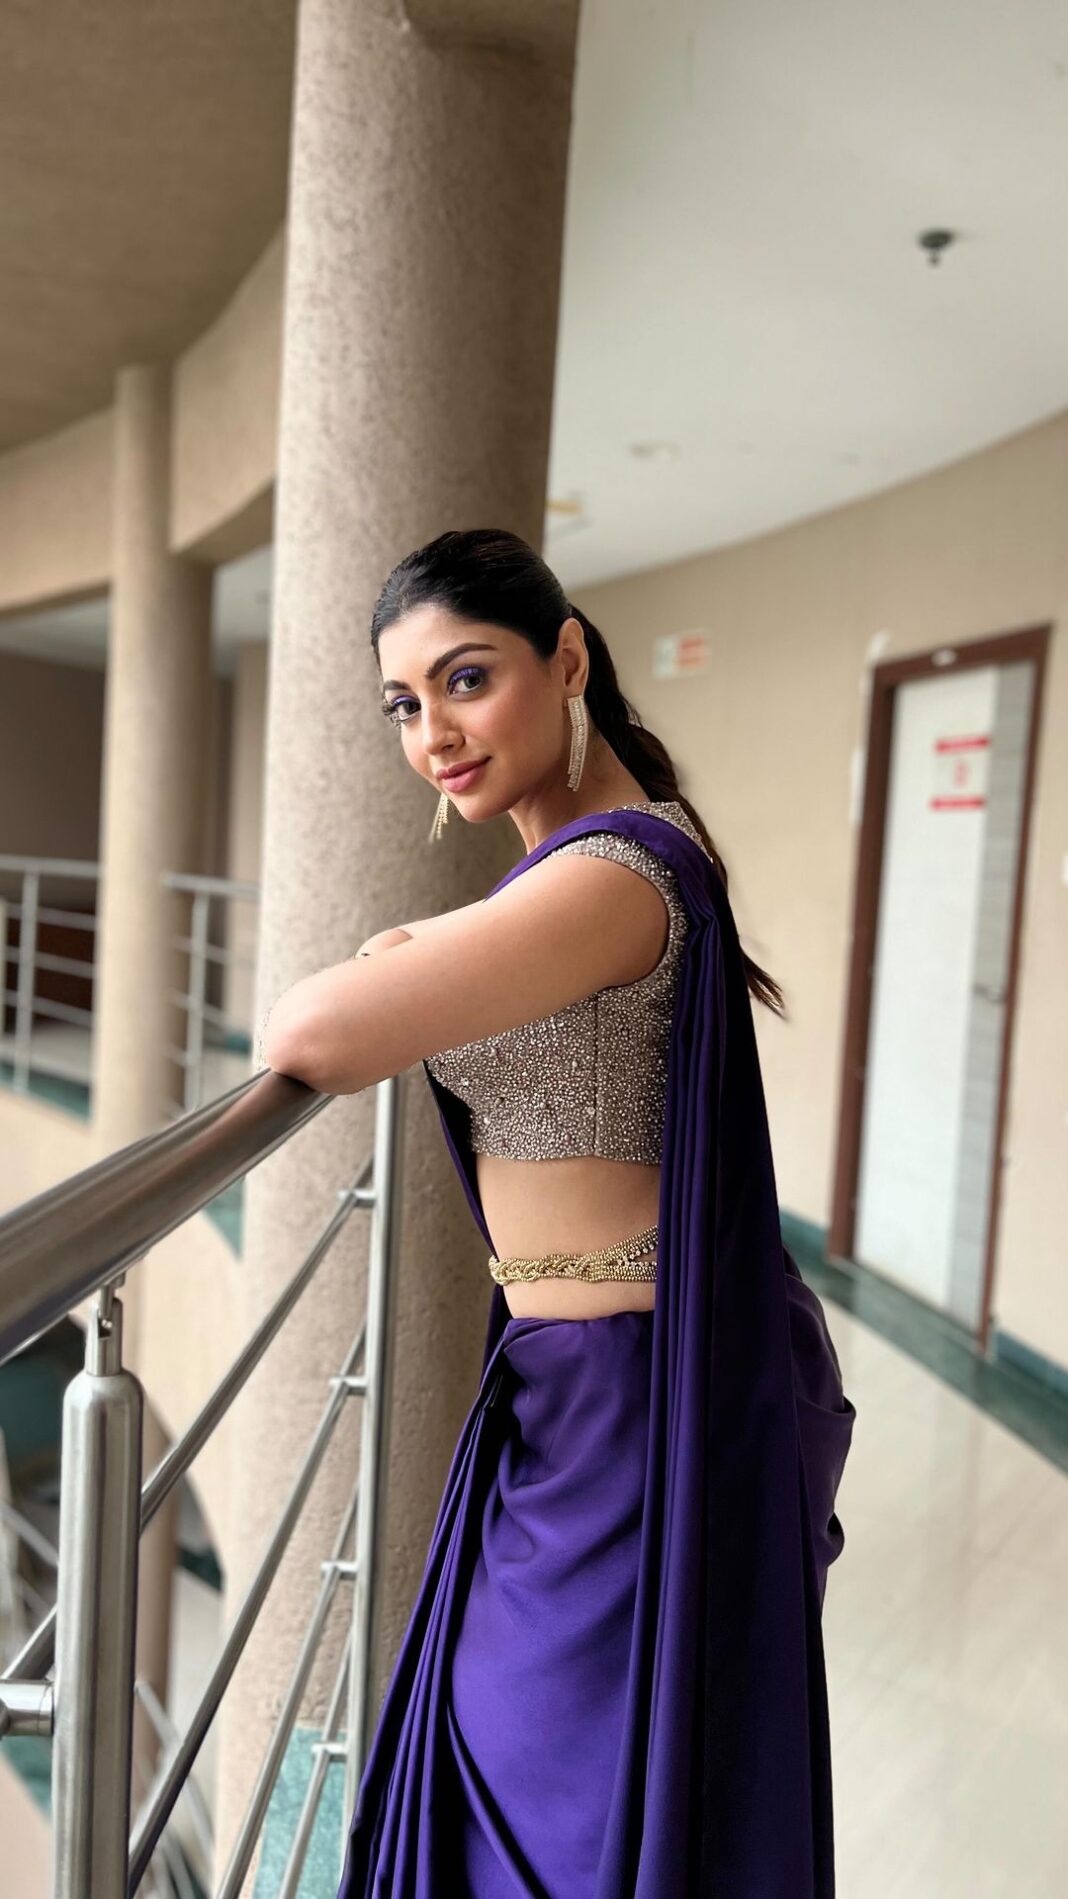 Akanksha Puri Instagram - My favourite look from the last day of #mikadivohti ❤️ This day will always be special!! Getting ready for my King @mikasingh 👑❤️ #mikasha . #reelsinstagram #reels #reelitfeelit #song #happybride #dance #trending #mikadivohti #mikasha #mikasingh #akankshapuri #smile #me #❤️ Outfit @poonampamnaniofficial Styled @sakshi312 Assisted by @ritika__ag @ms_tanaya @pooja_autade20